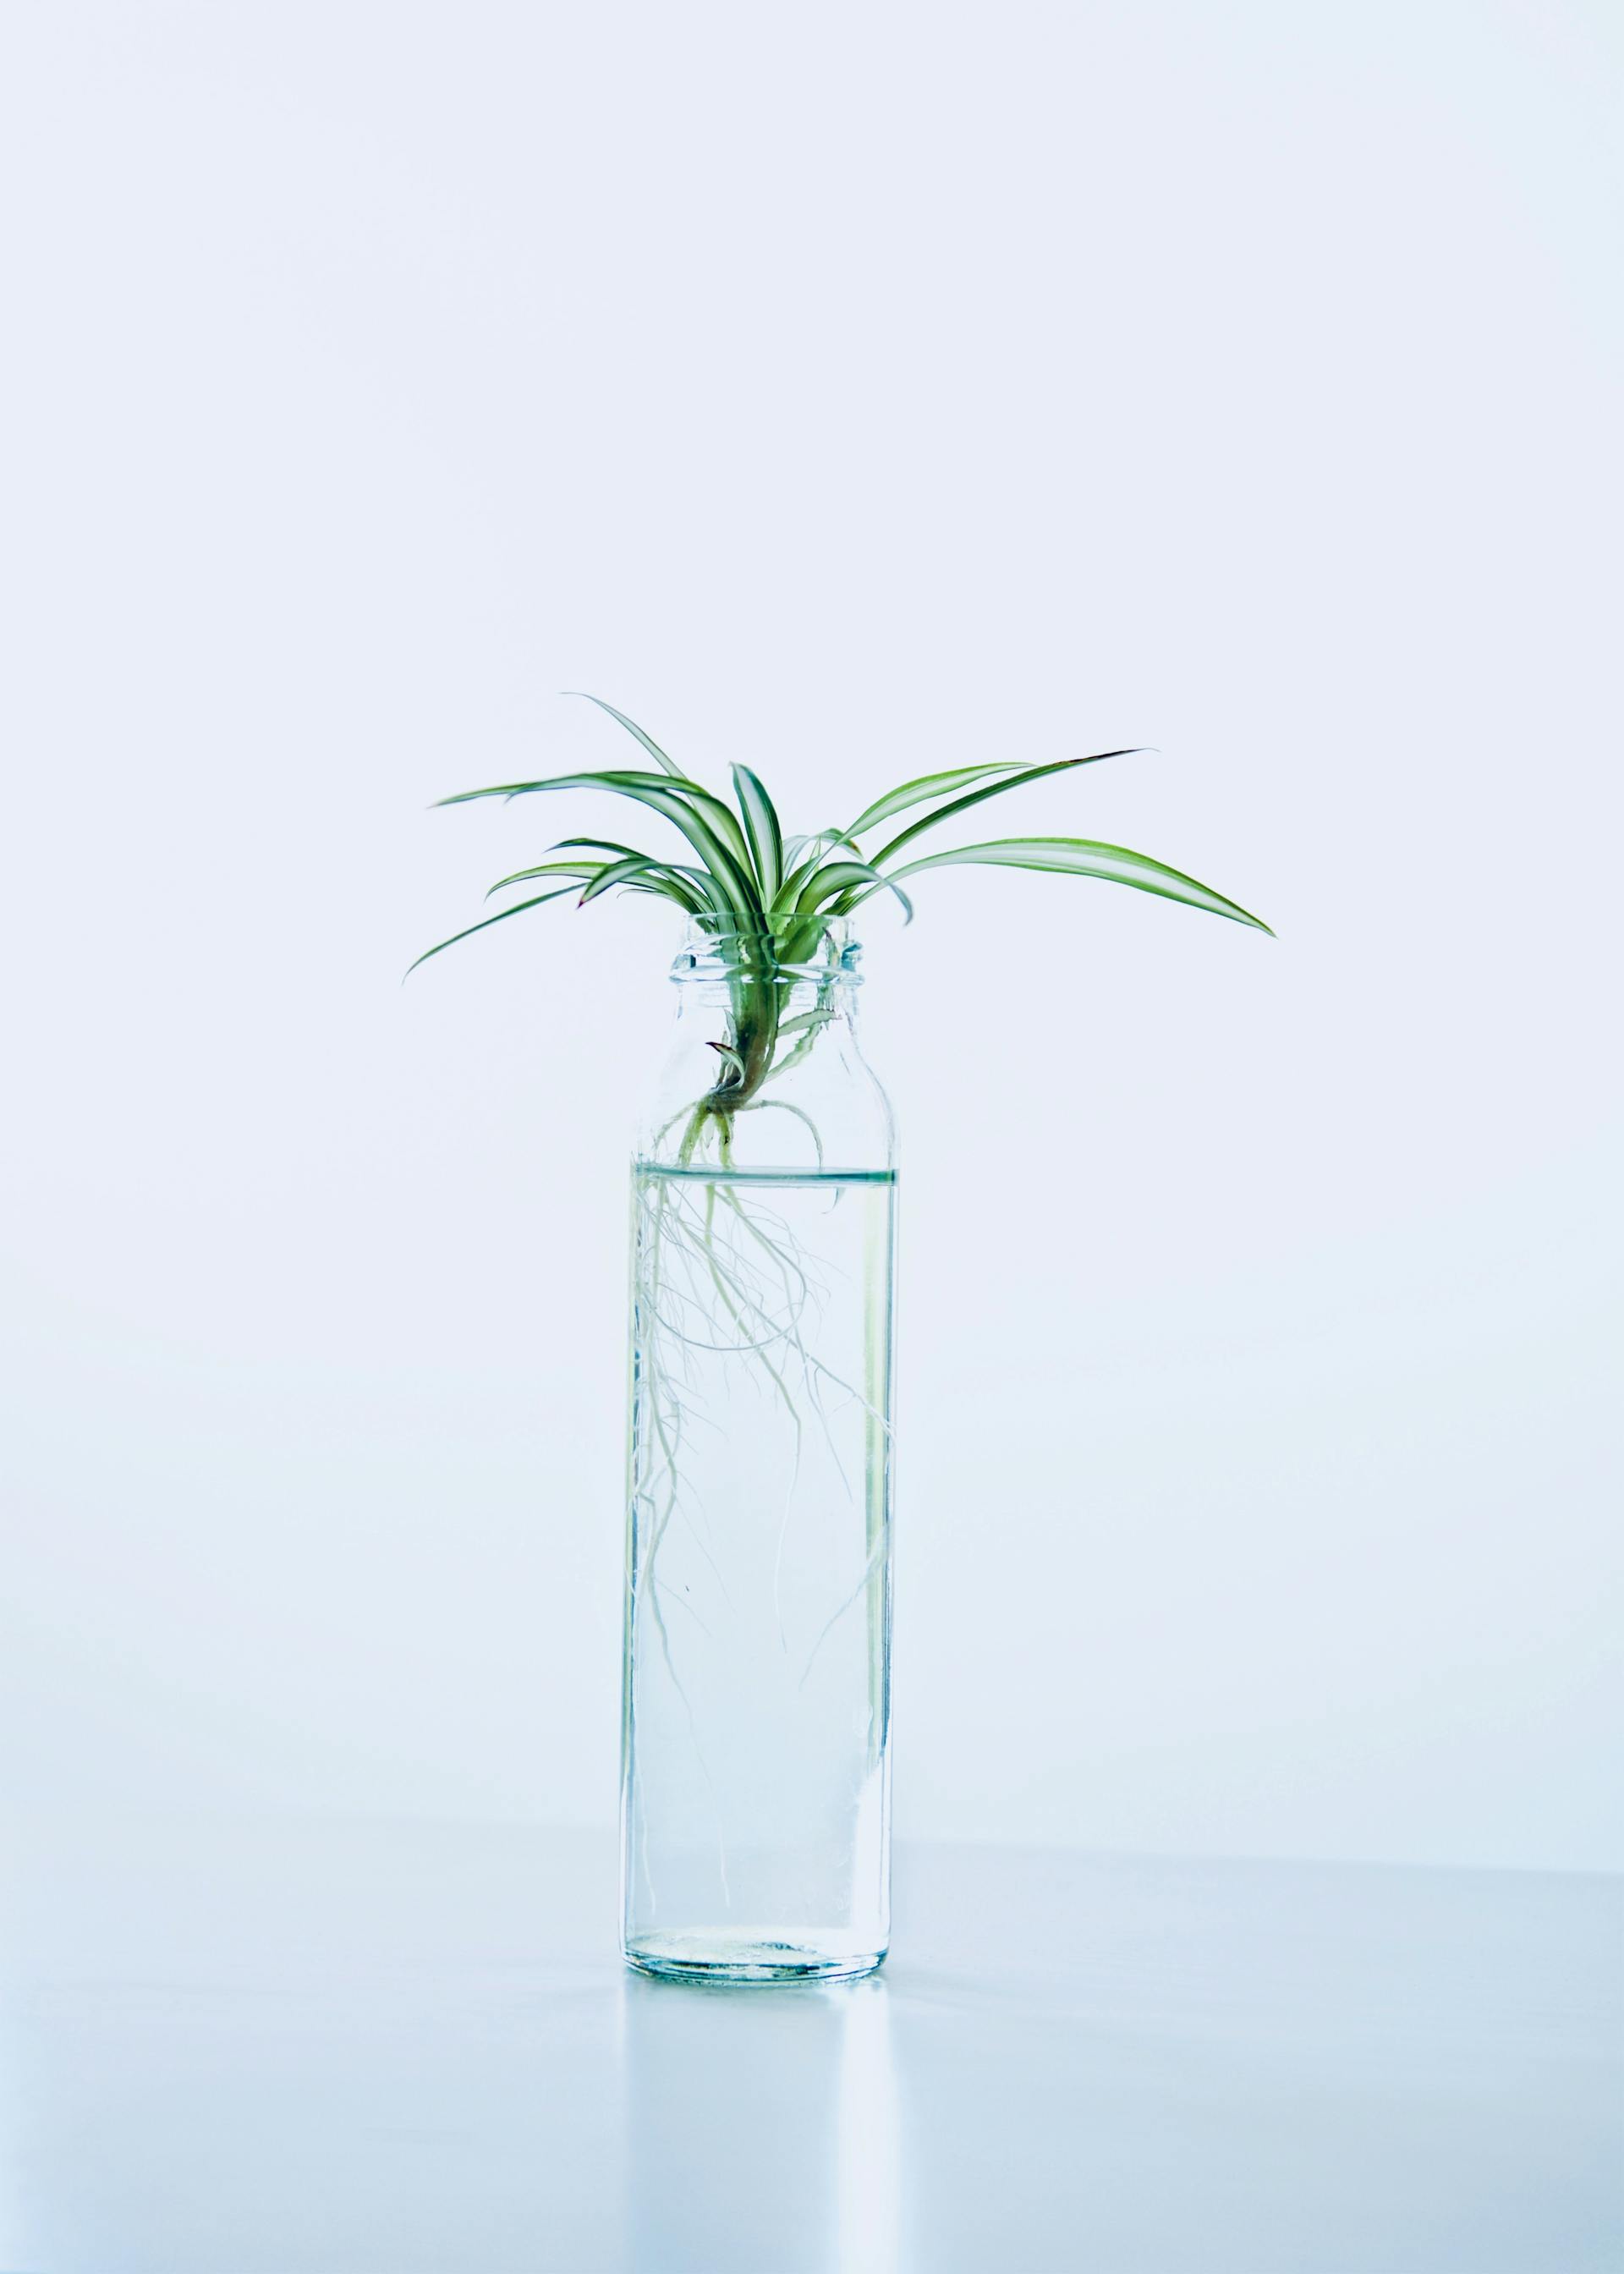 A green plant in a glass bottle with water | Source: Pexels